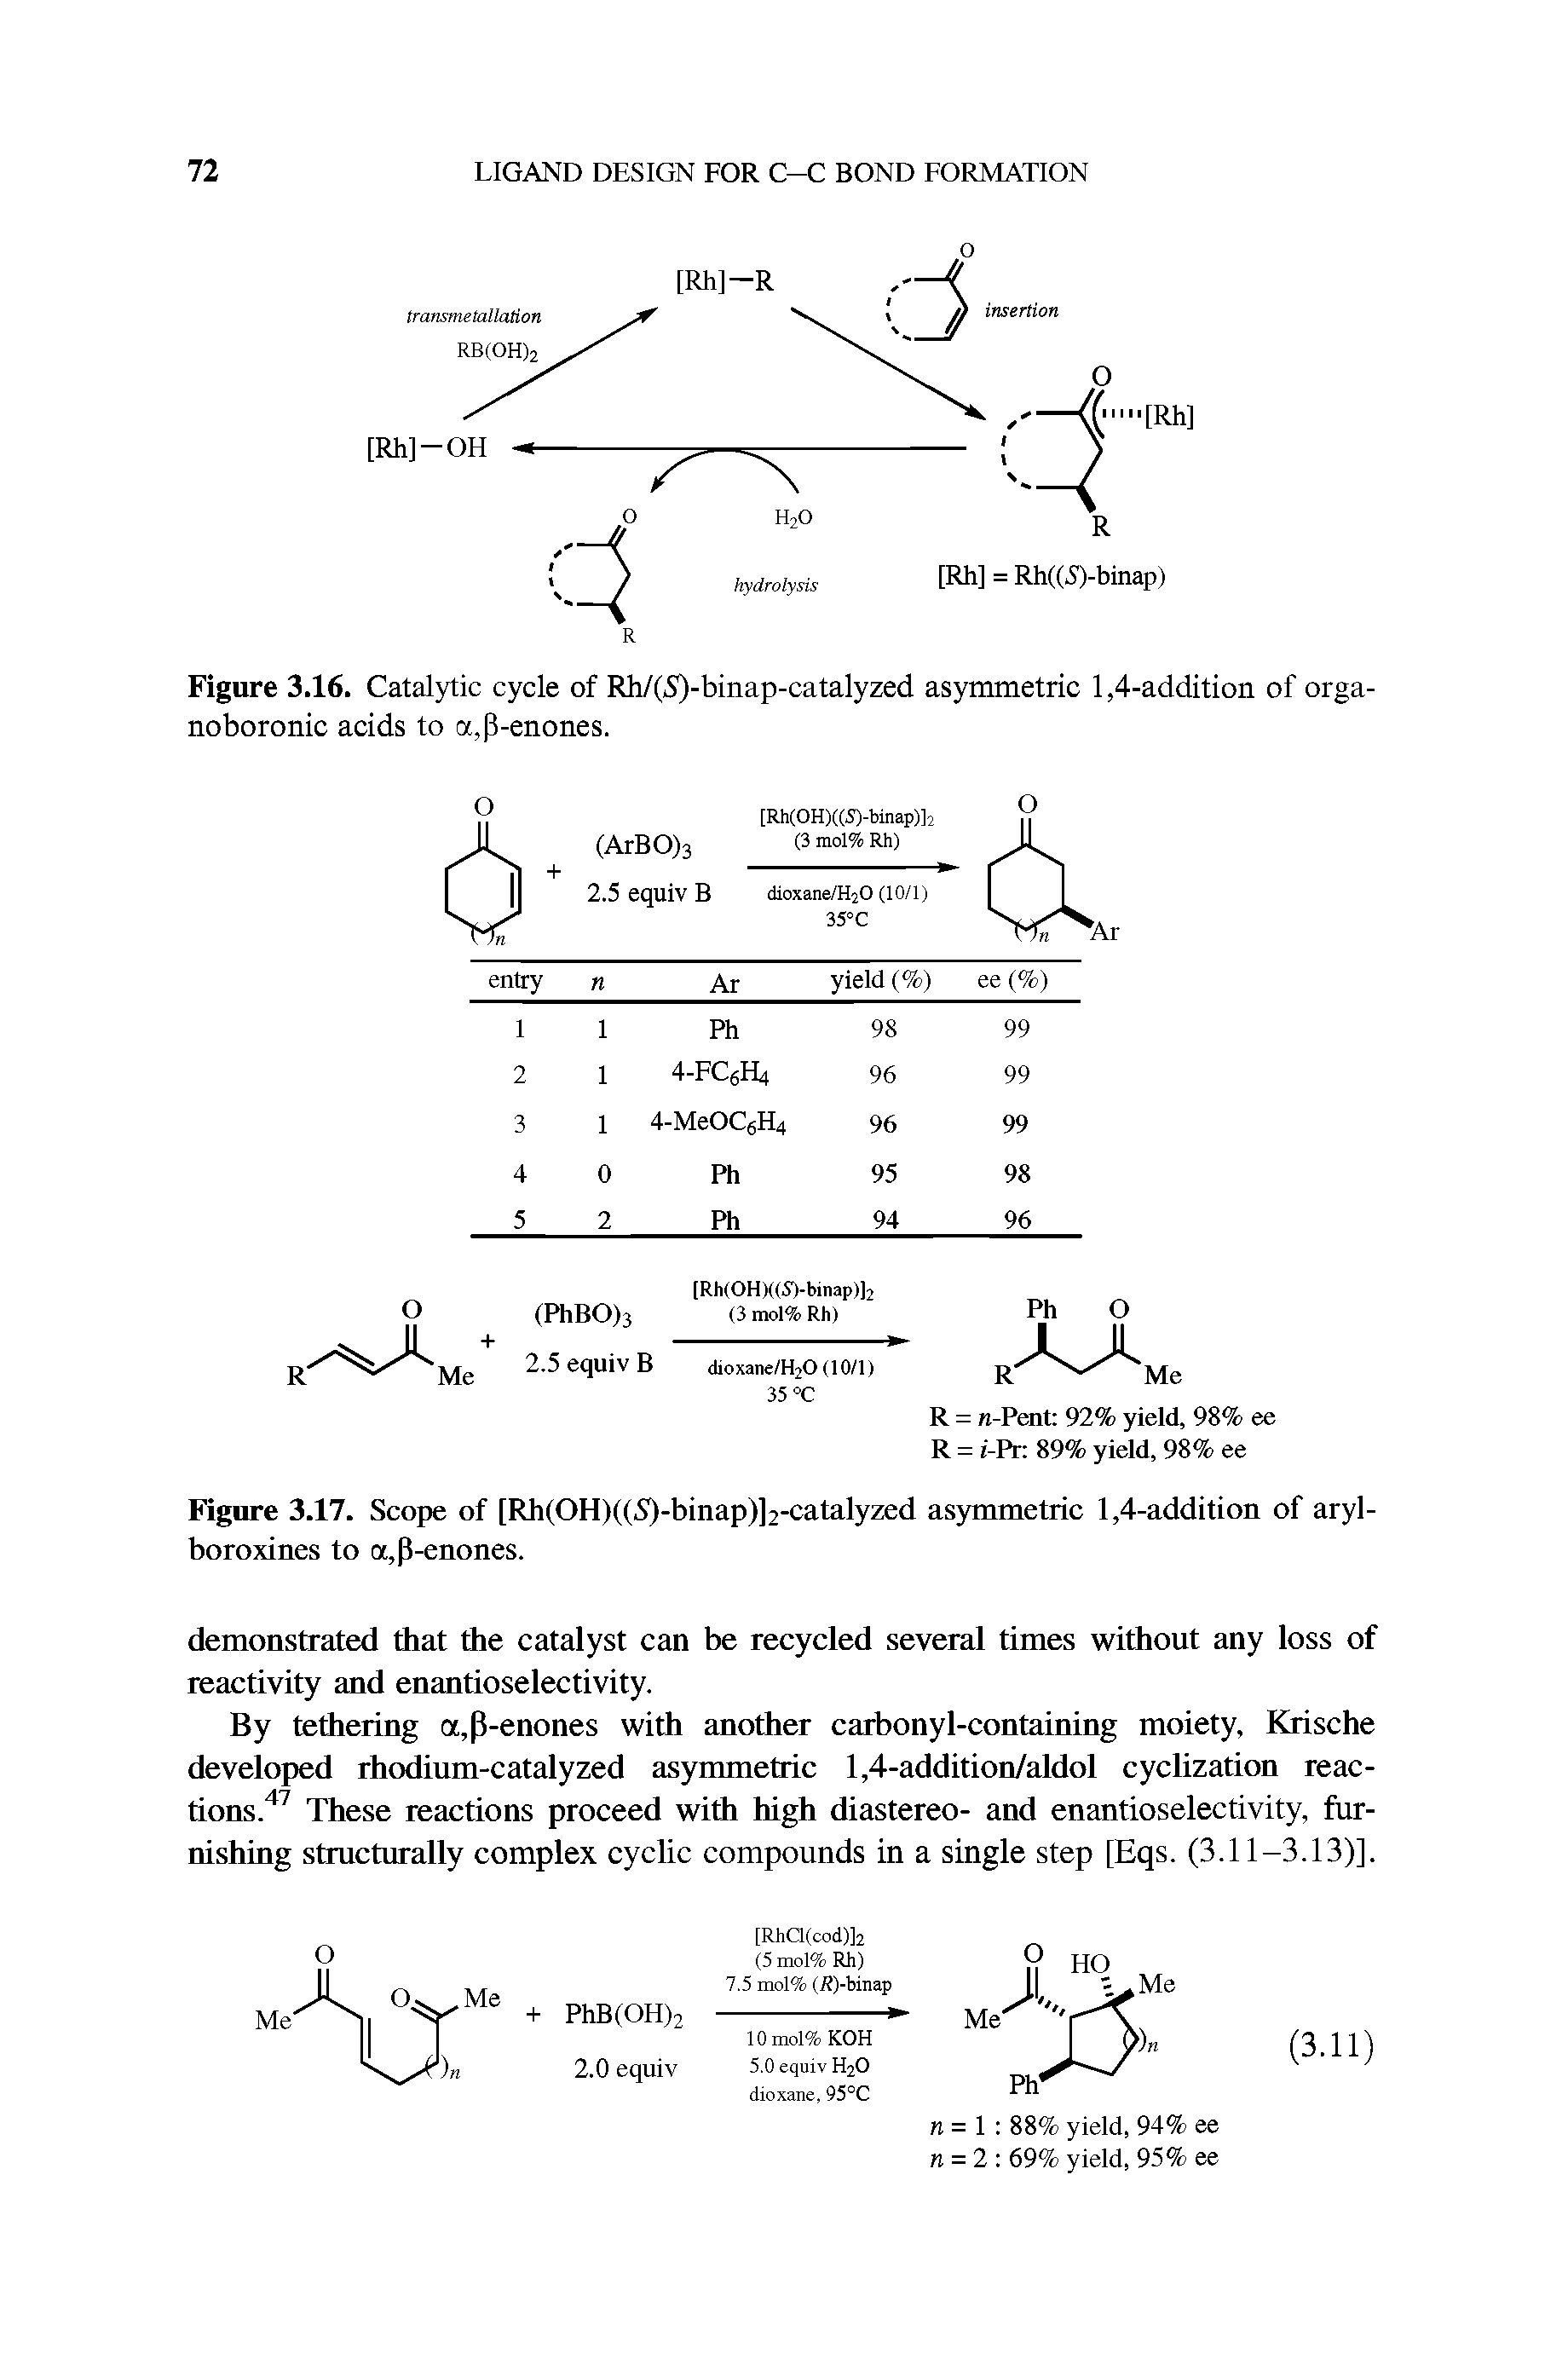 Figure 3.16. Catalytic cycle of Rh/(5)-binap-catalyzed asymmetric 1,4-addition of orga-noboronic acids to a,P-enones.